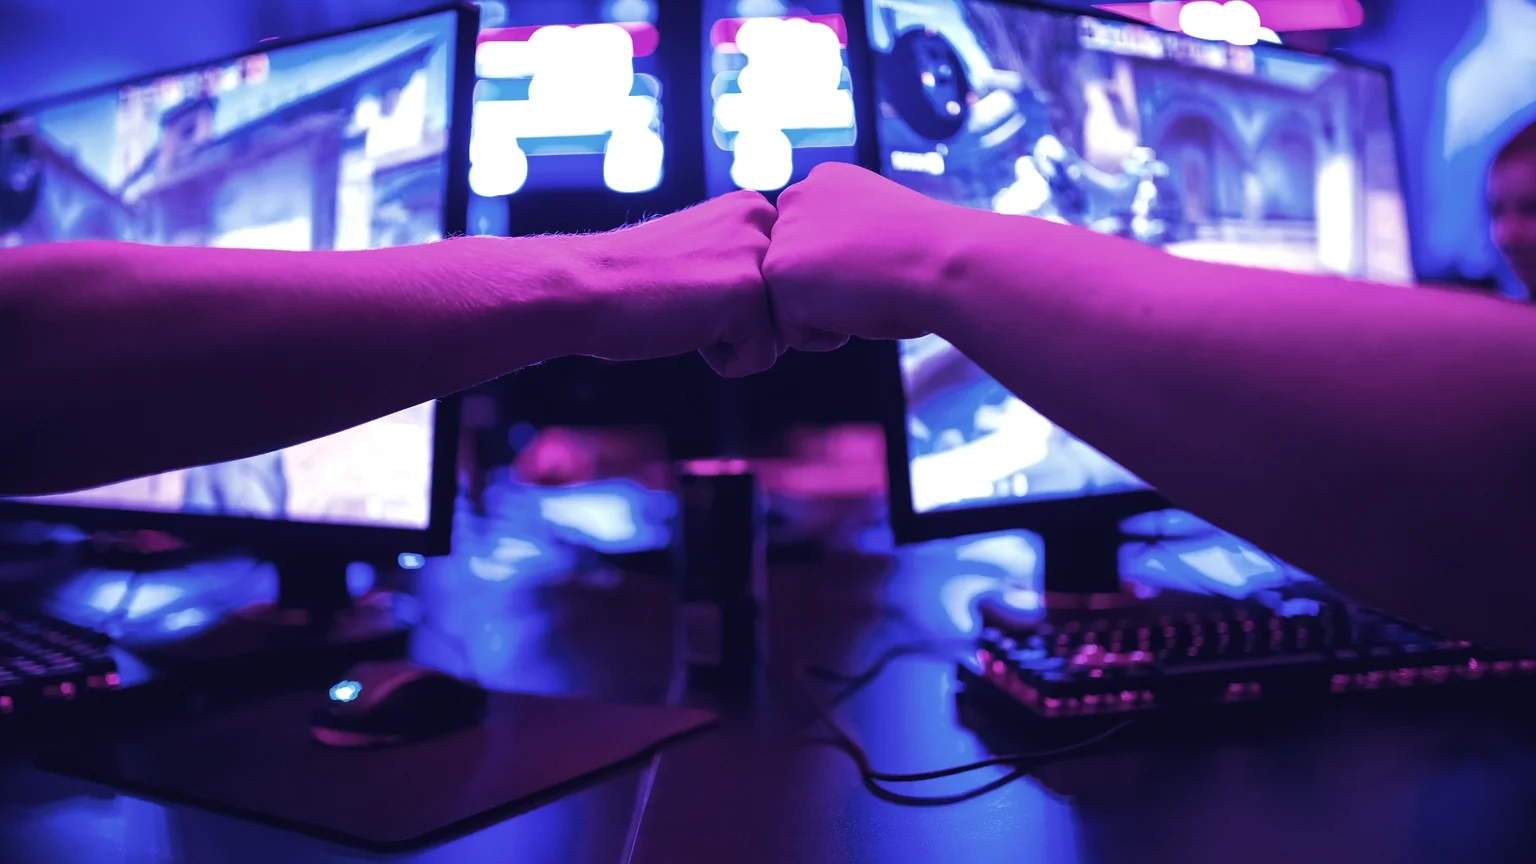 esports has grown to be a hugely popular and lucrative industry. Image: Shutterstock